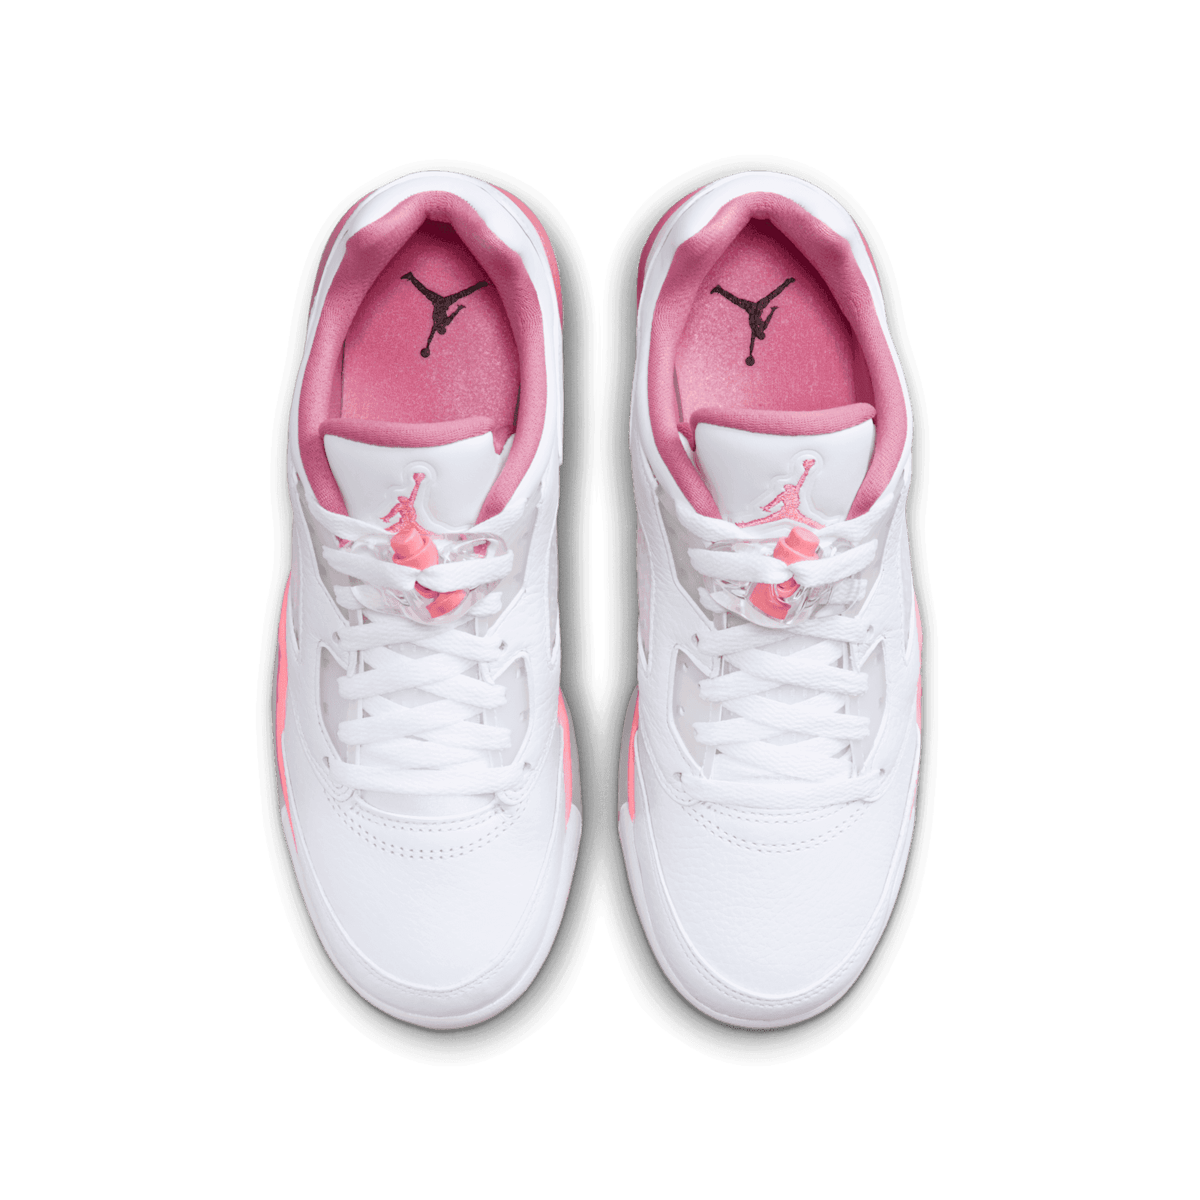 Air Jordan 5 Retro Low Crafted For Her (GS) Angle 1